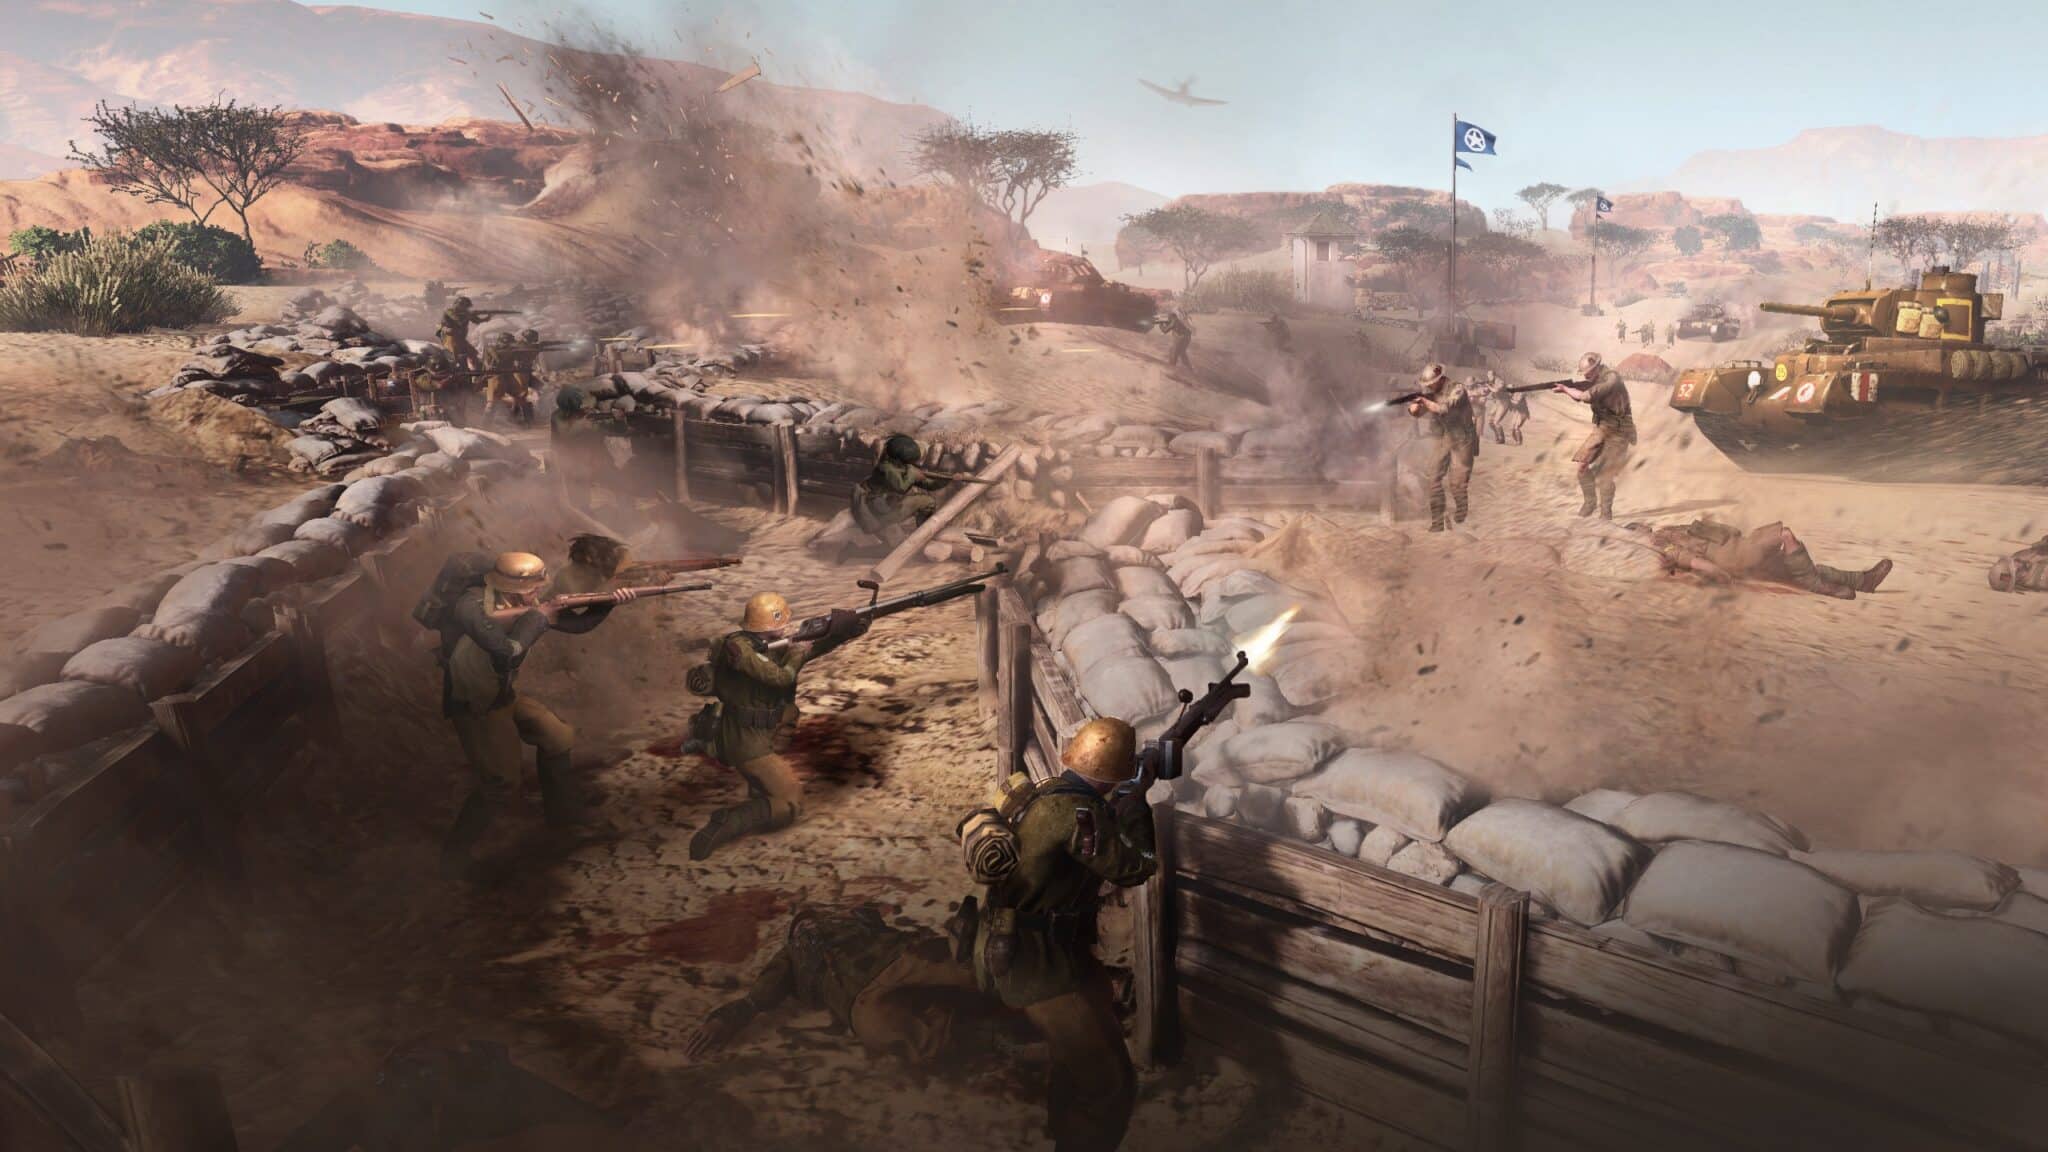 (In the story of Company of Heroes 3, this time we fight alongside the Wehrmacht against the British - and in North Africa.)